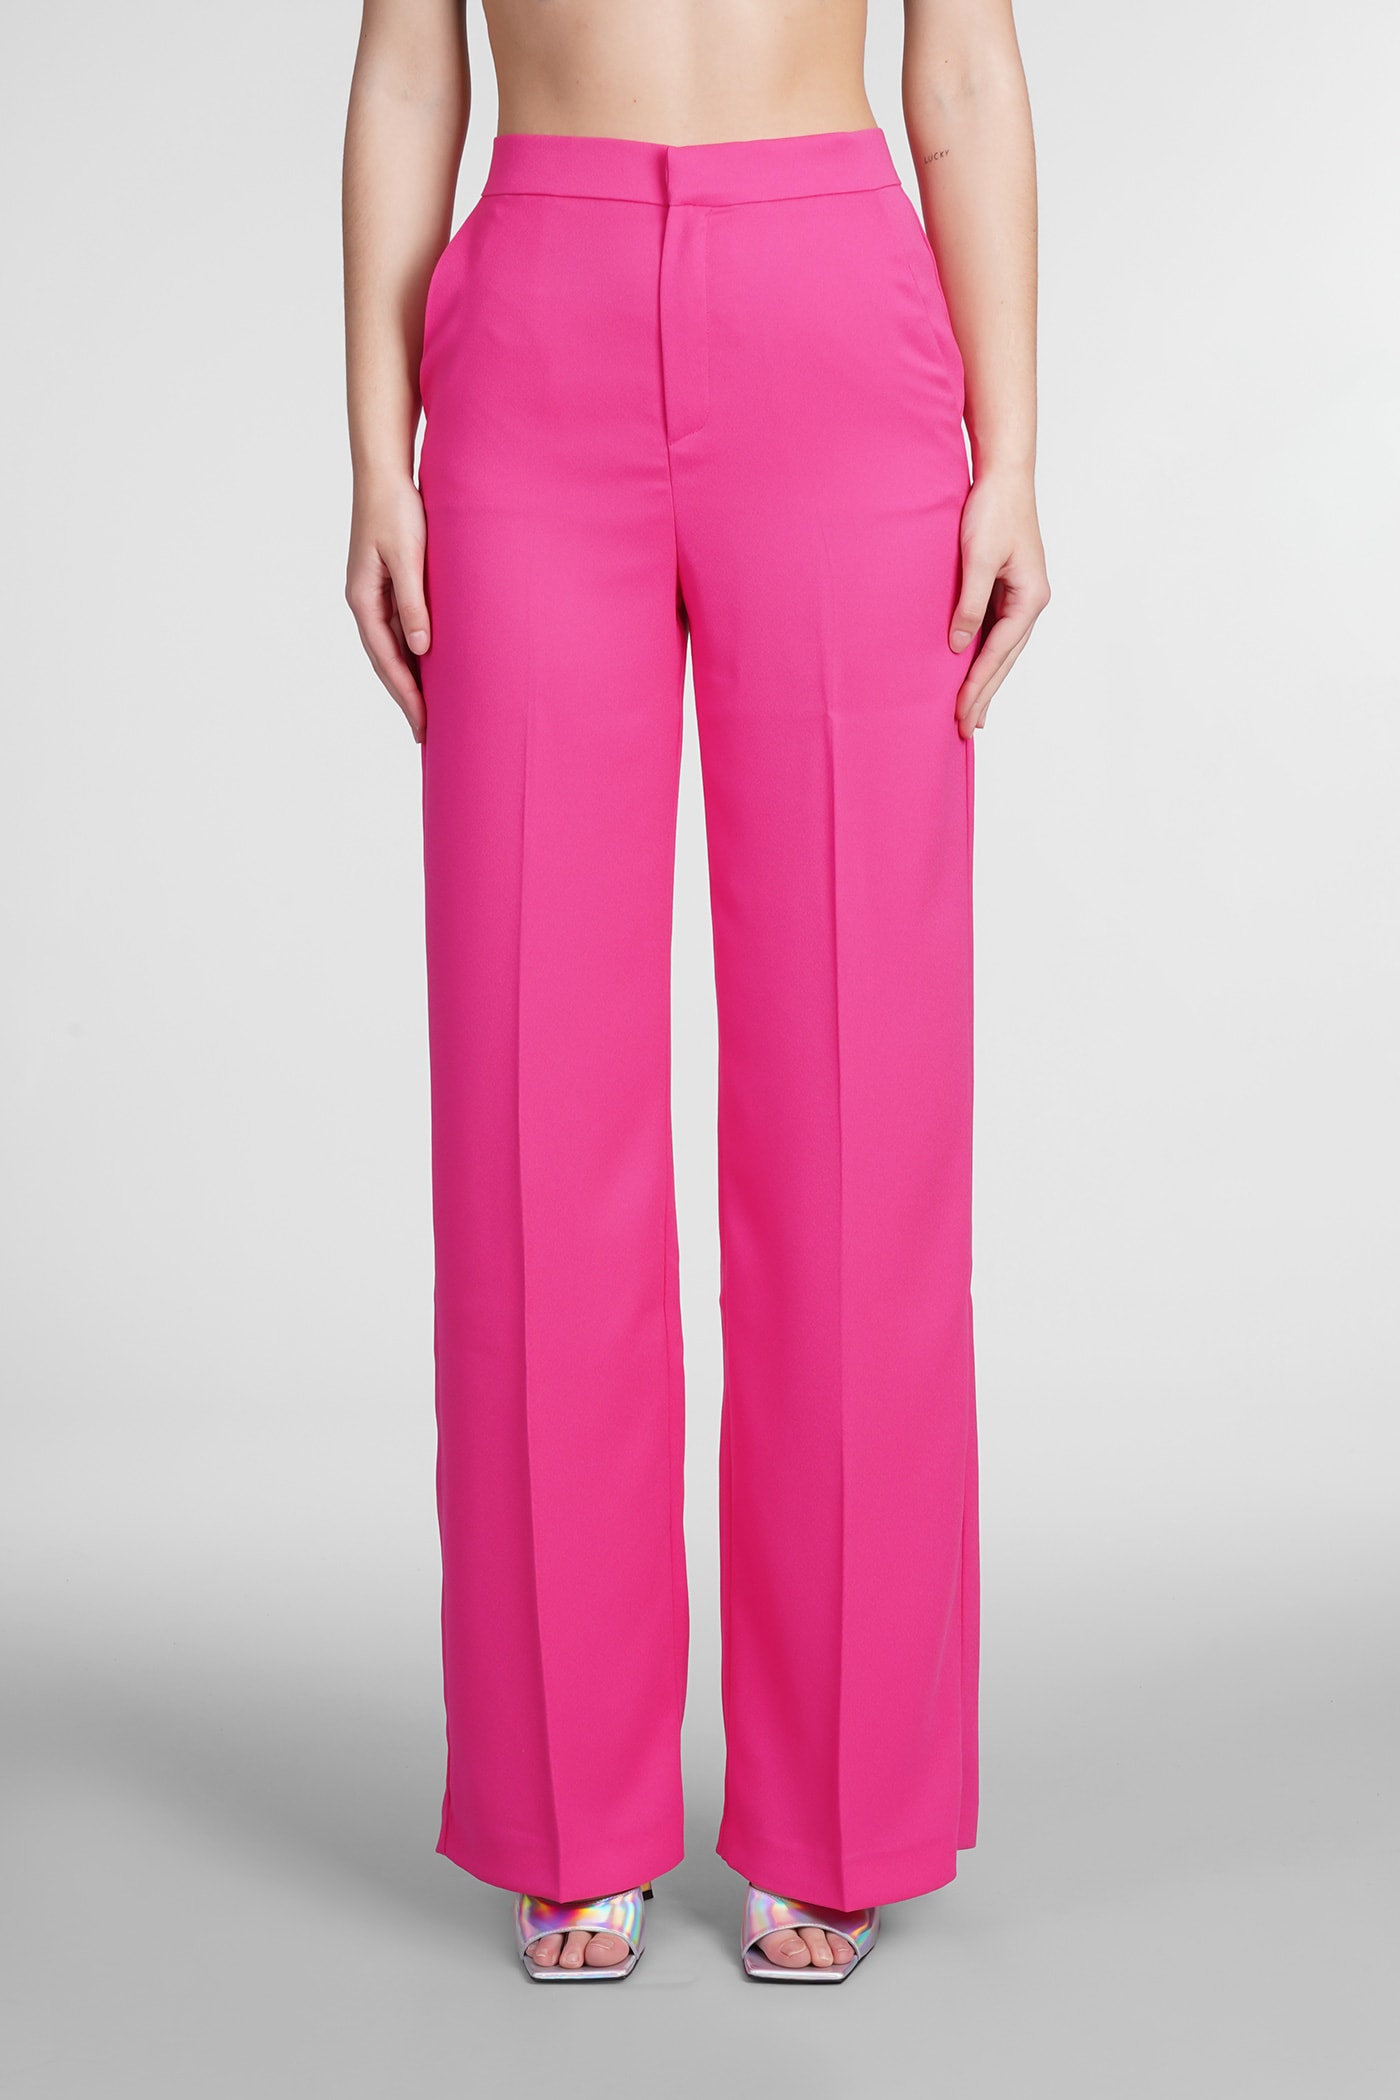 THE ANDAMANE KARLA PANTS IN FUXIA POLYESTER